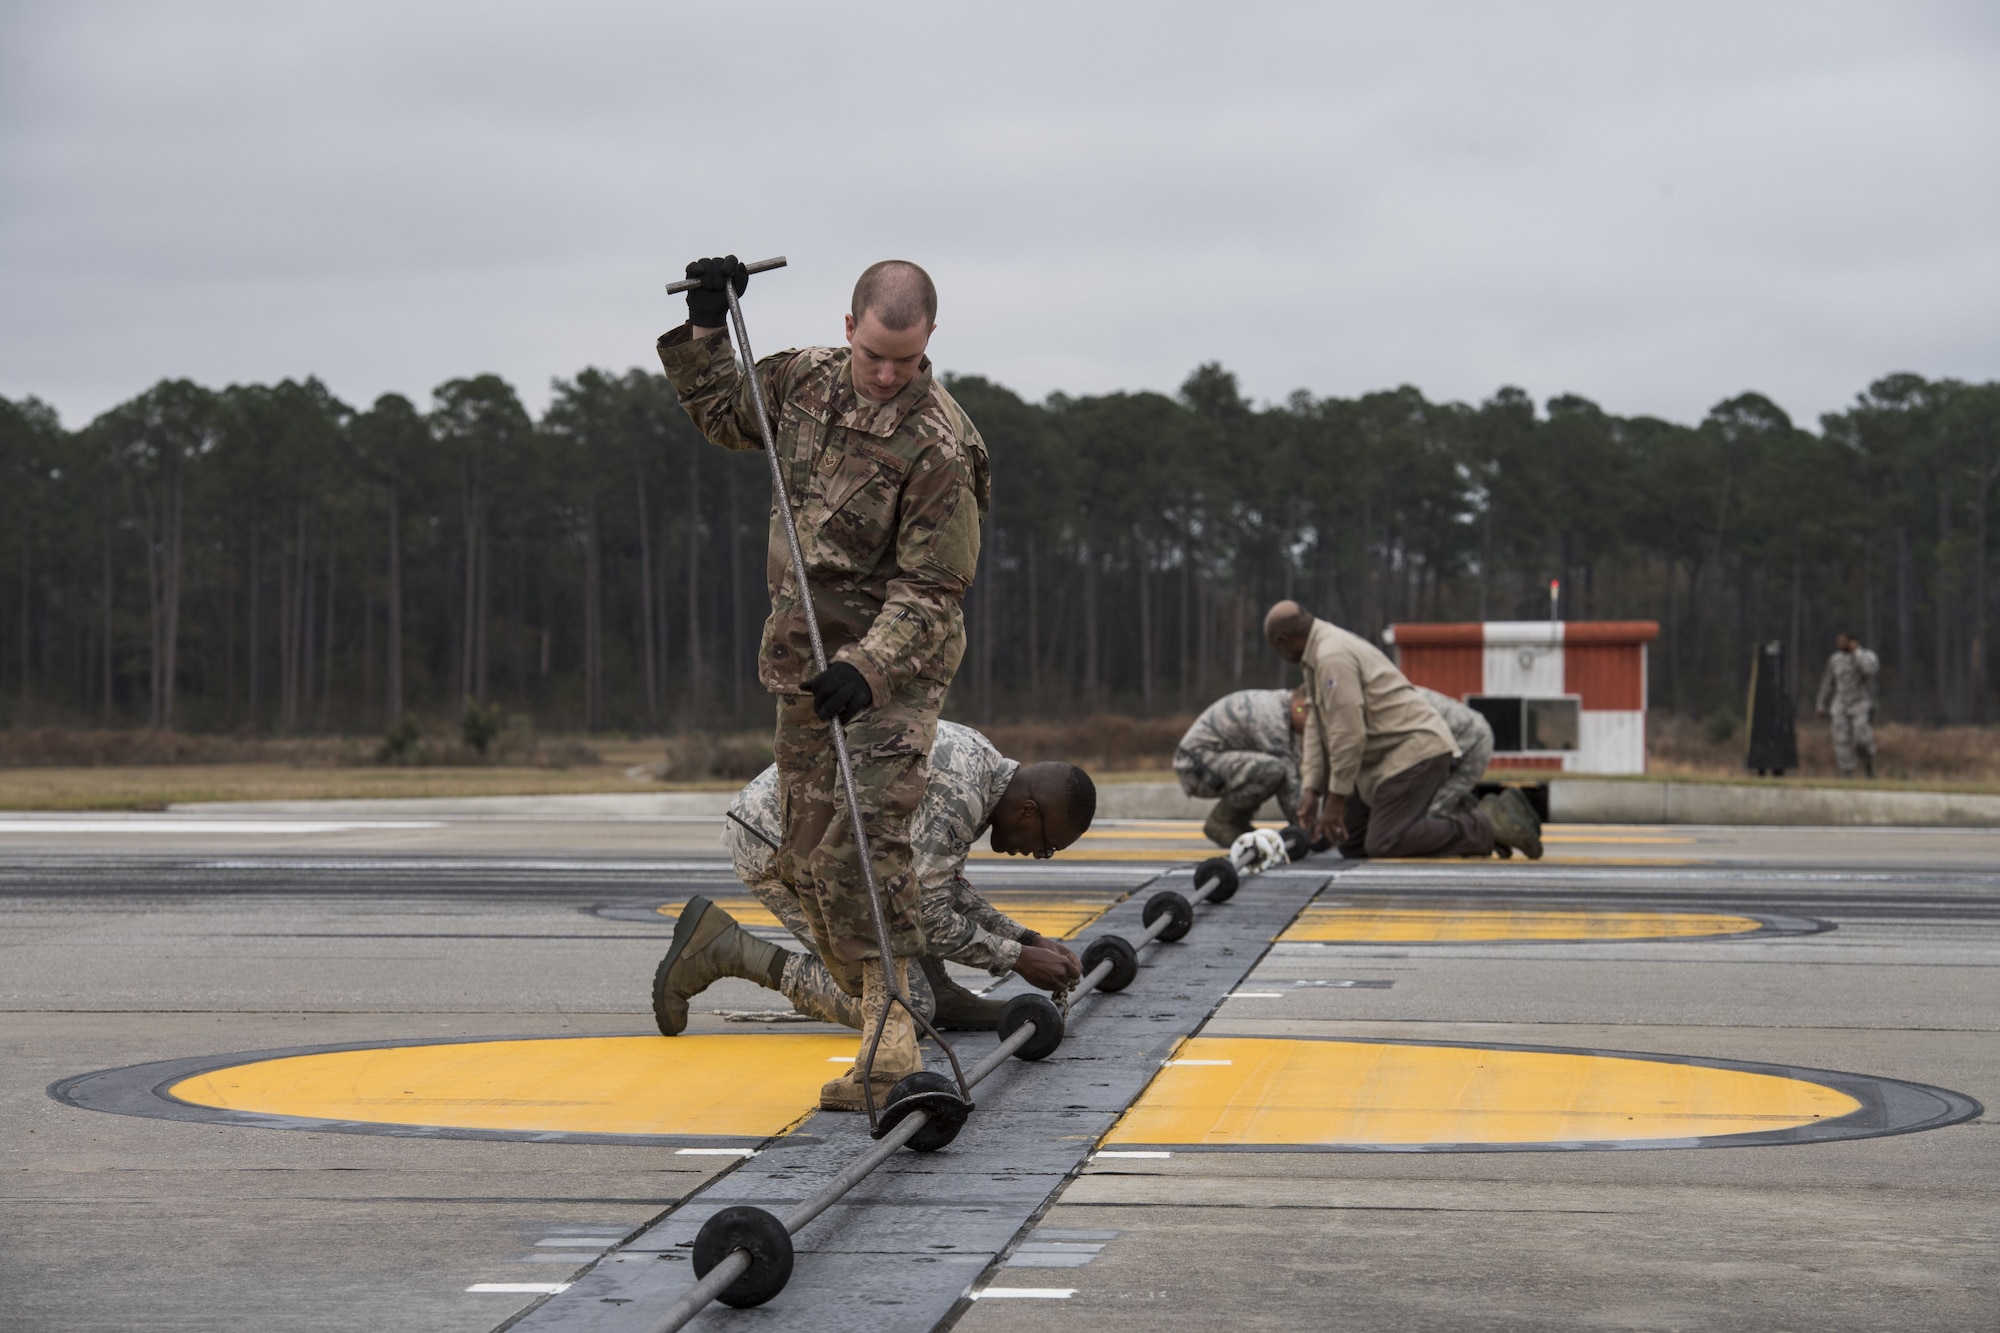 Airmen from 23d Civil Engineer Squadron power production shop, work on various tasks while preparing an arresting system for use, Dec. 19, 2017, at Moody Air Force Base, Ga. The beam is a part of a BAK-12 arresting system that is used on the runway to slow down fighter aircraft in emergency situations. (U.S. Air Force photo by Senior Airman Janiqua P. Robinson)